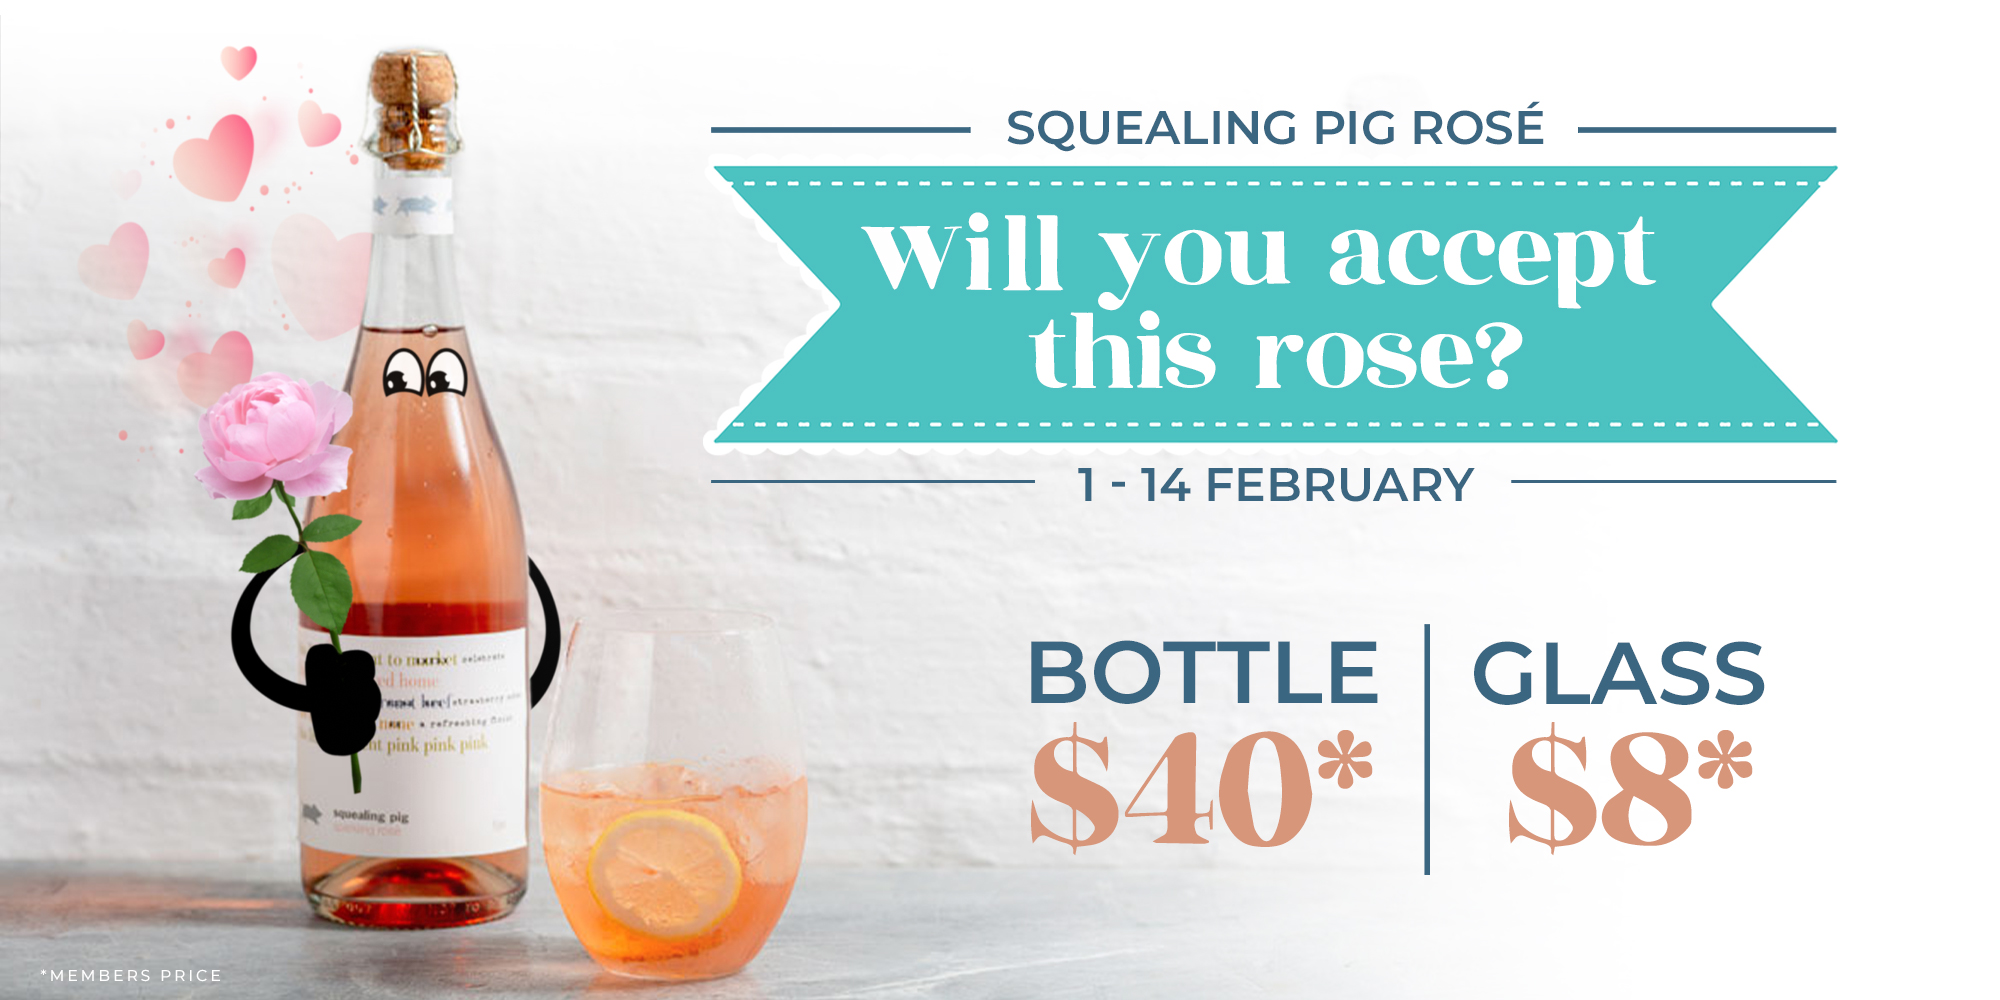 Beverage promotion. Squealing Pig Rose. $40 a bottle. $8 a glass